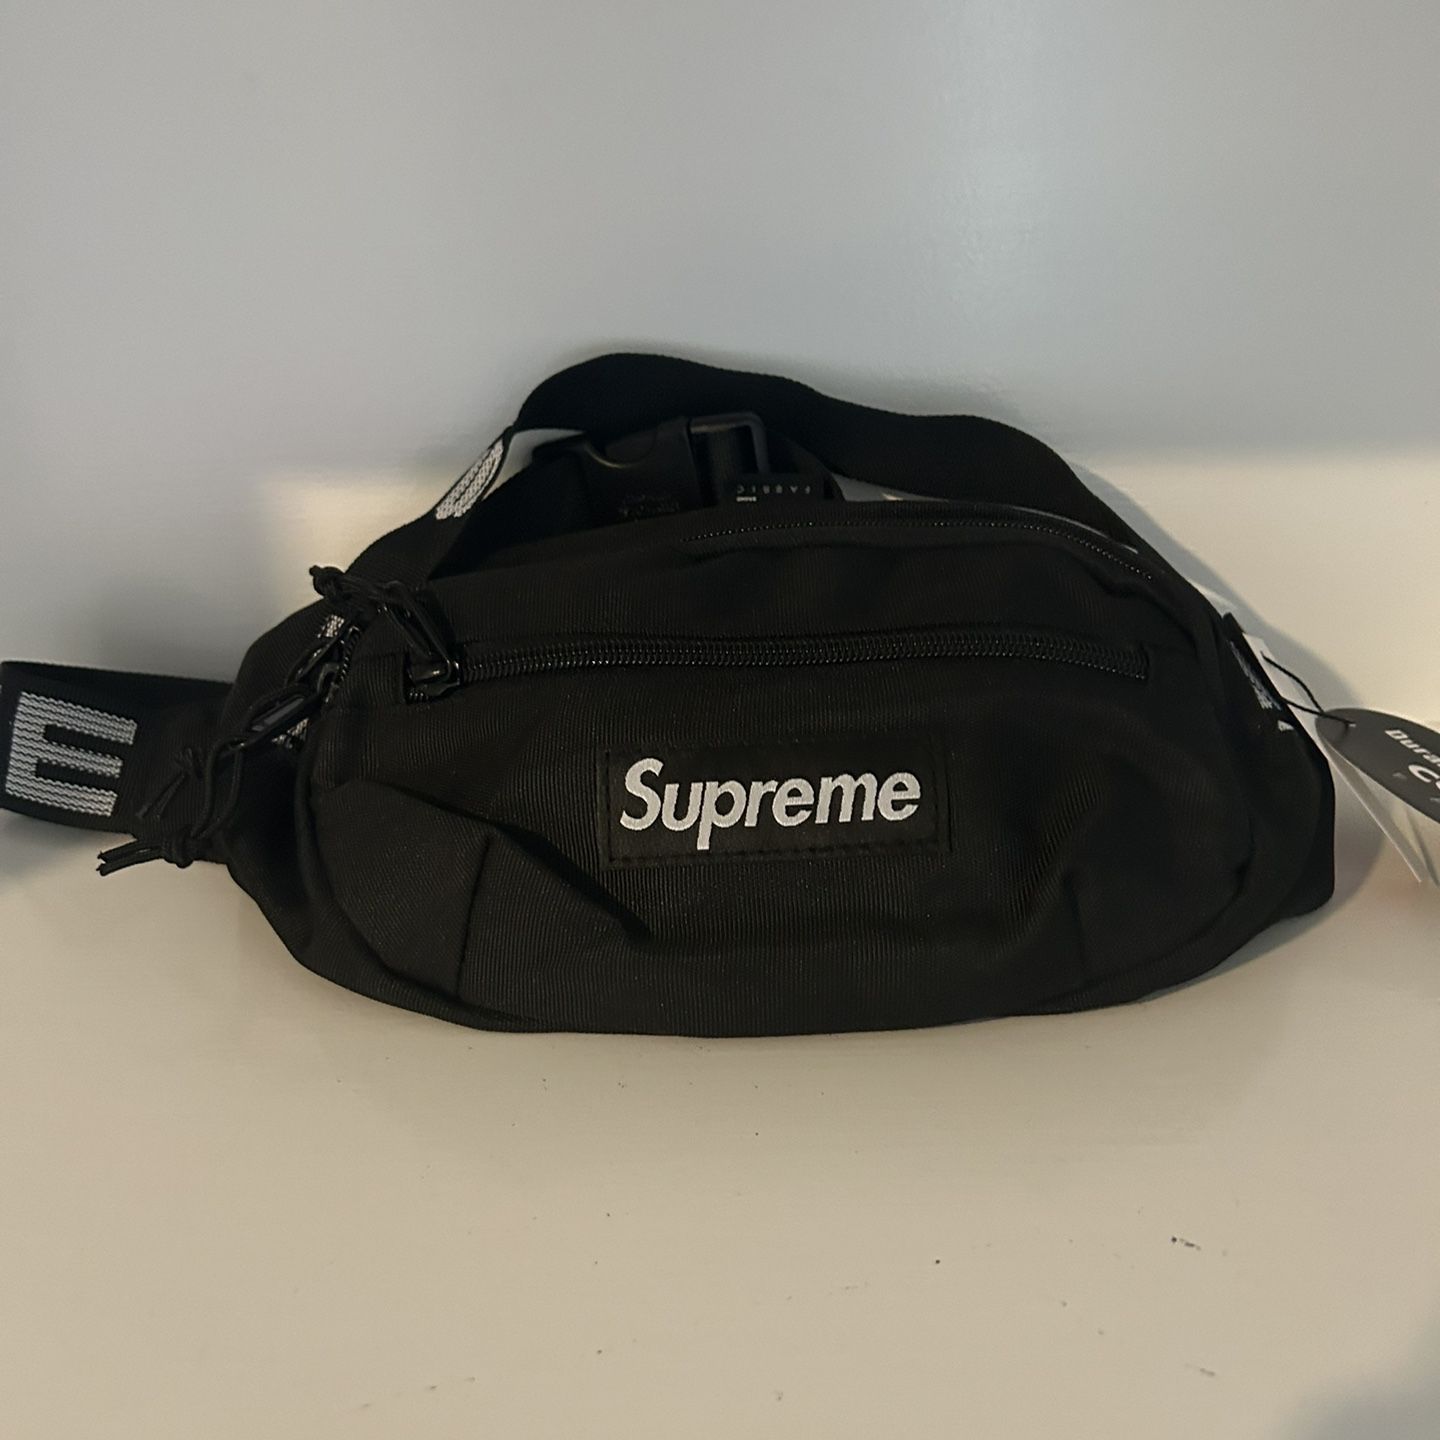 Supreme SS18 Waist Bag Black Brand New Ships Within 1 Day Willing To Negotiate 